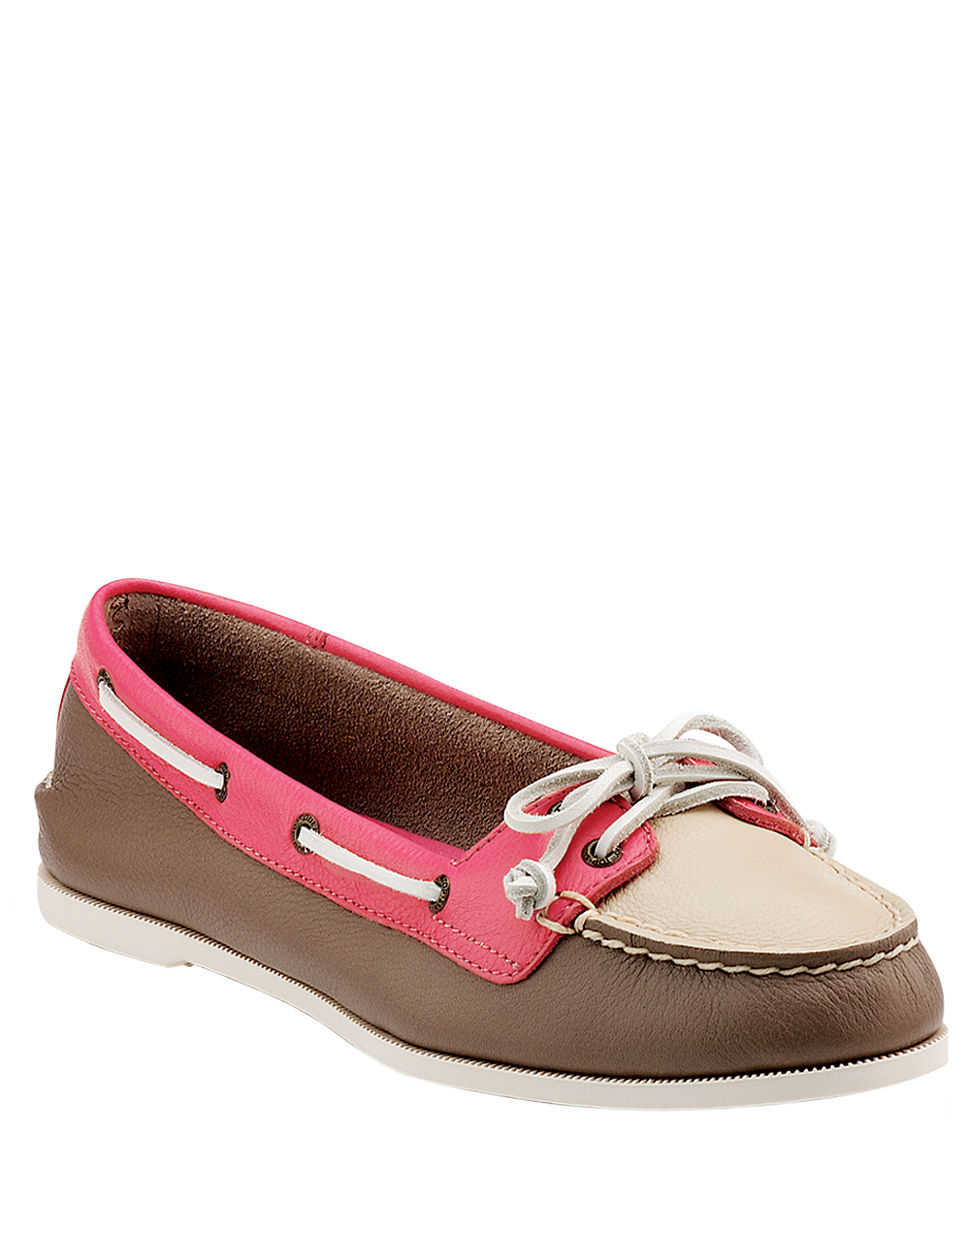 Sperry Top-sider Audrey Leather Slipon Boat Shoes in Beige | Lyst